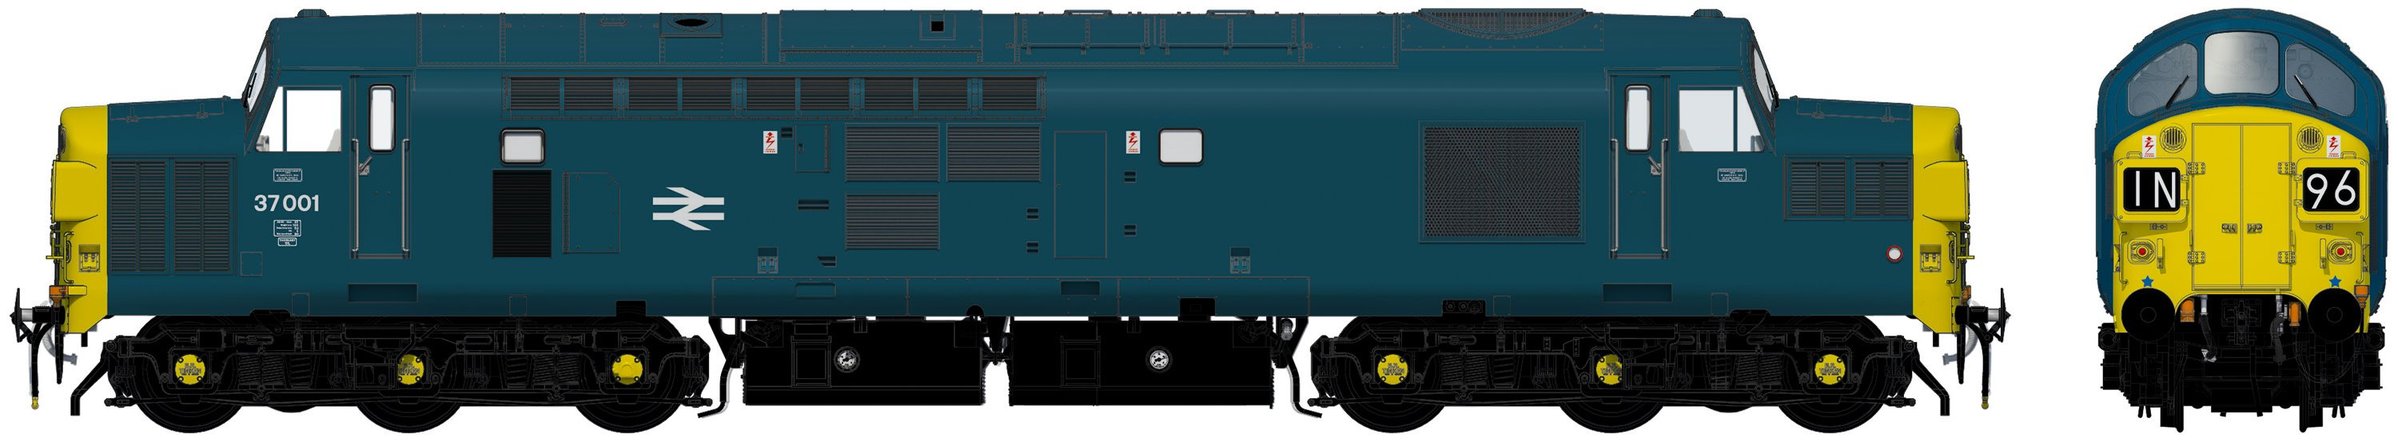 Accurascale ACC230437001 EE Type 3 37001 Image